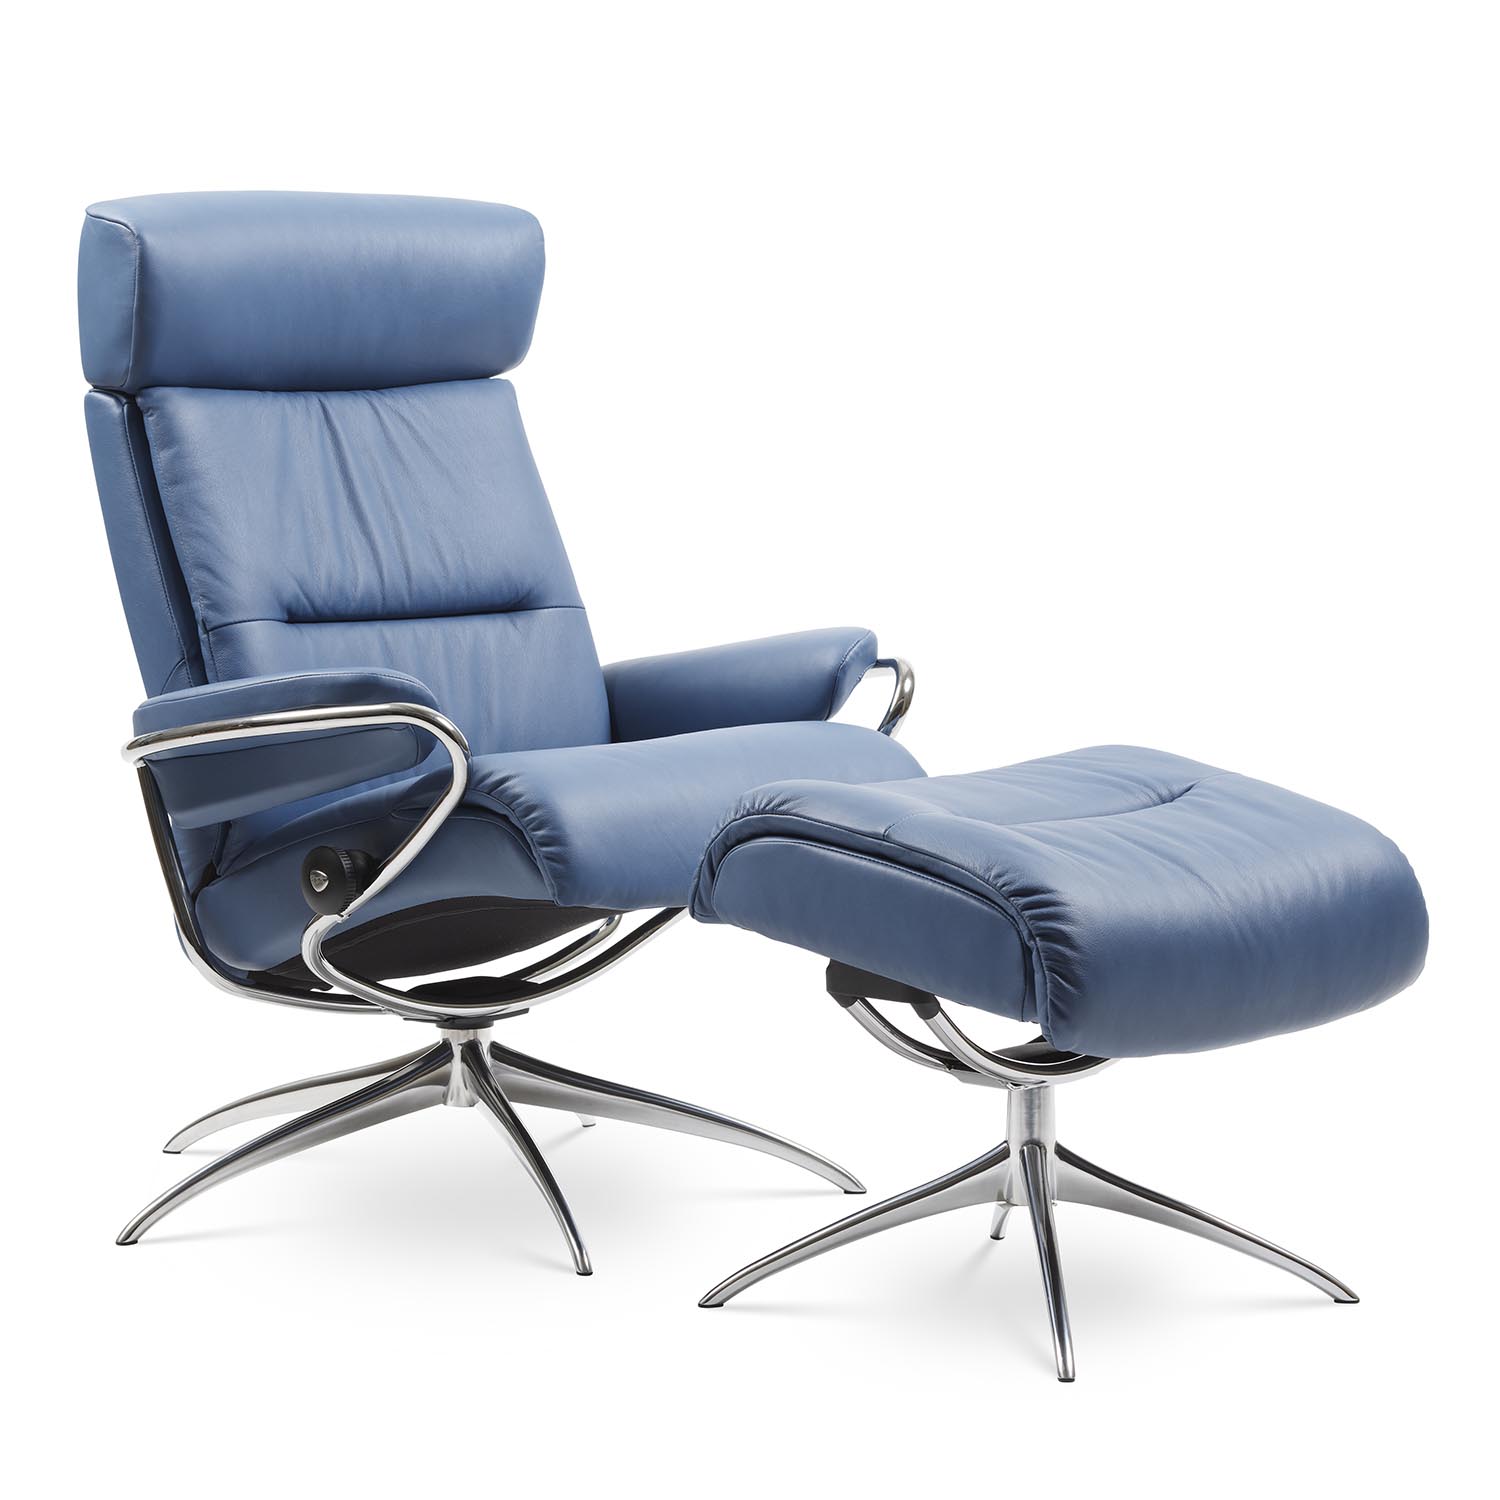 Stressless Tokyo with Adjustable Headrest Chair & Stool in Batick Lazuli Blue leather